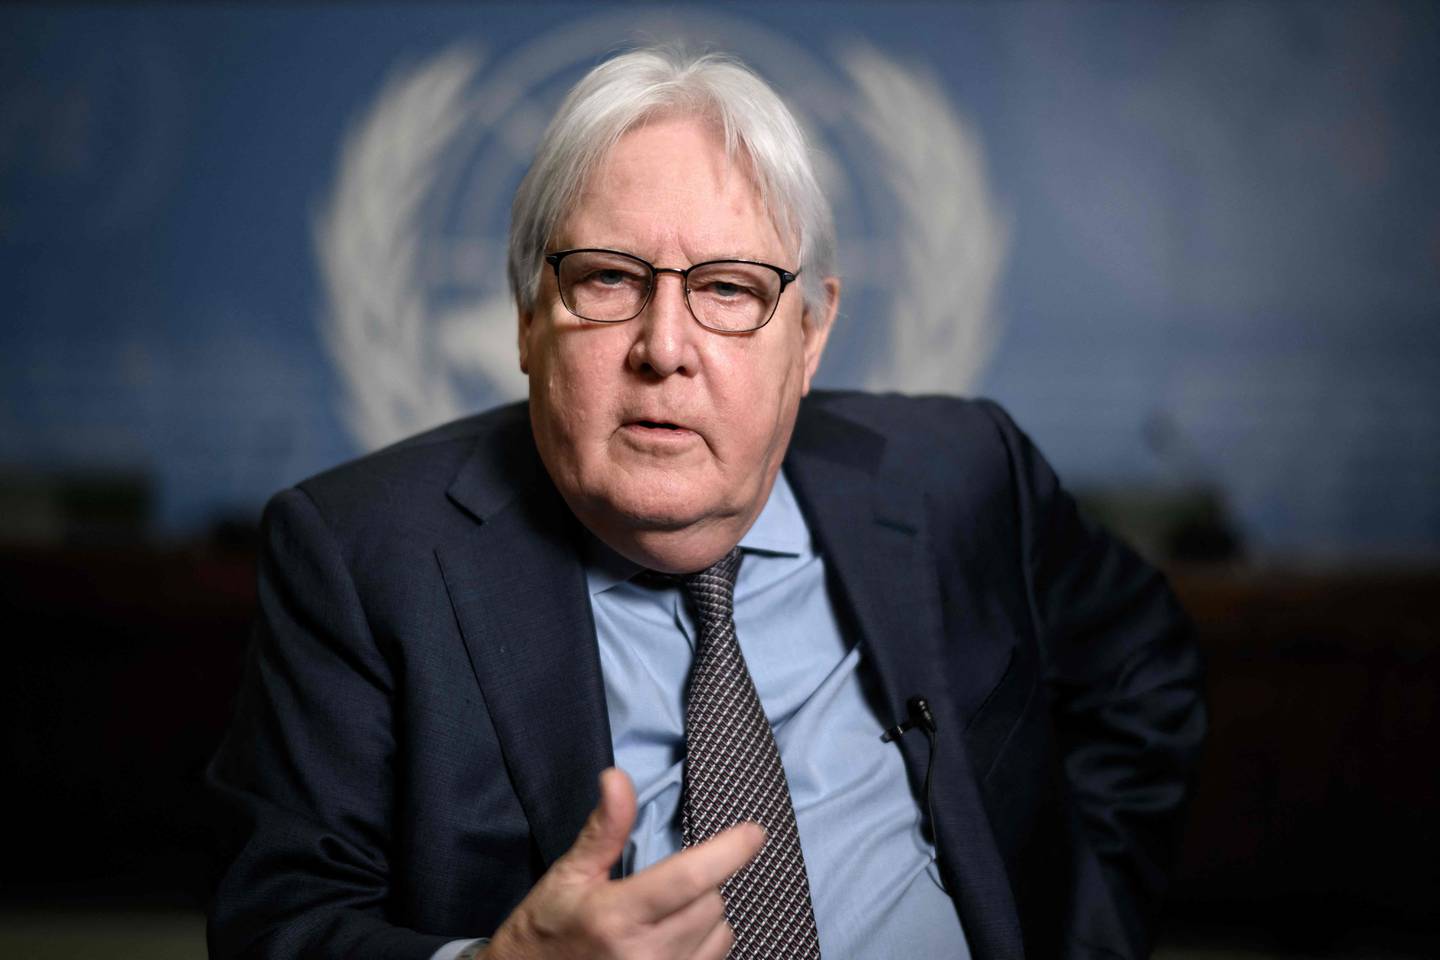 UN aid chief Martin Griffiths said 'millions of lives have been shattered' in Ukraine. AFP